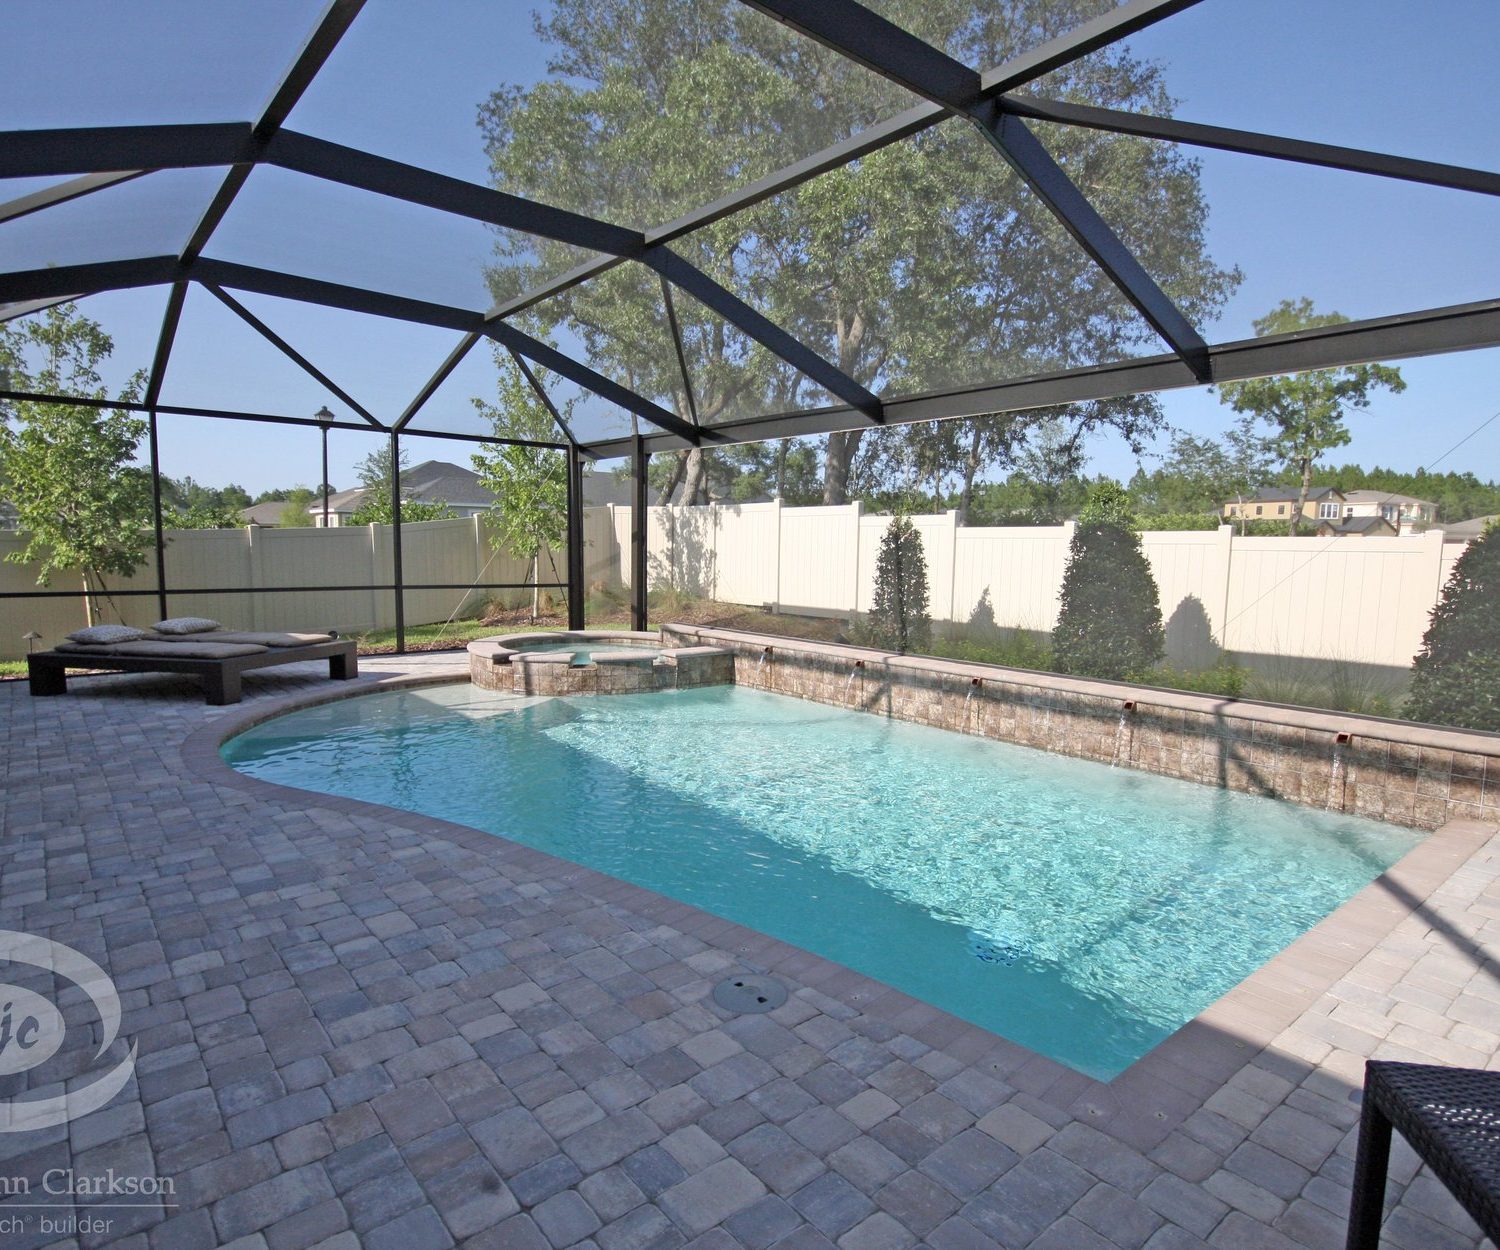 Freeform Swimming Pools in Northeast Florida | Pools by John Clarkson